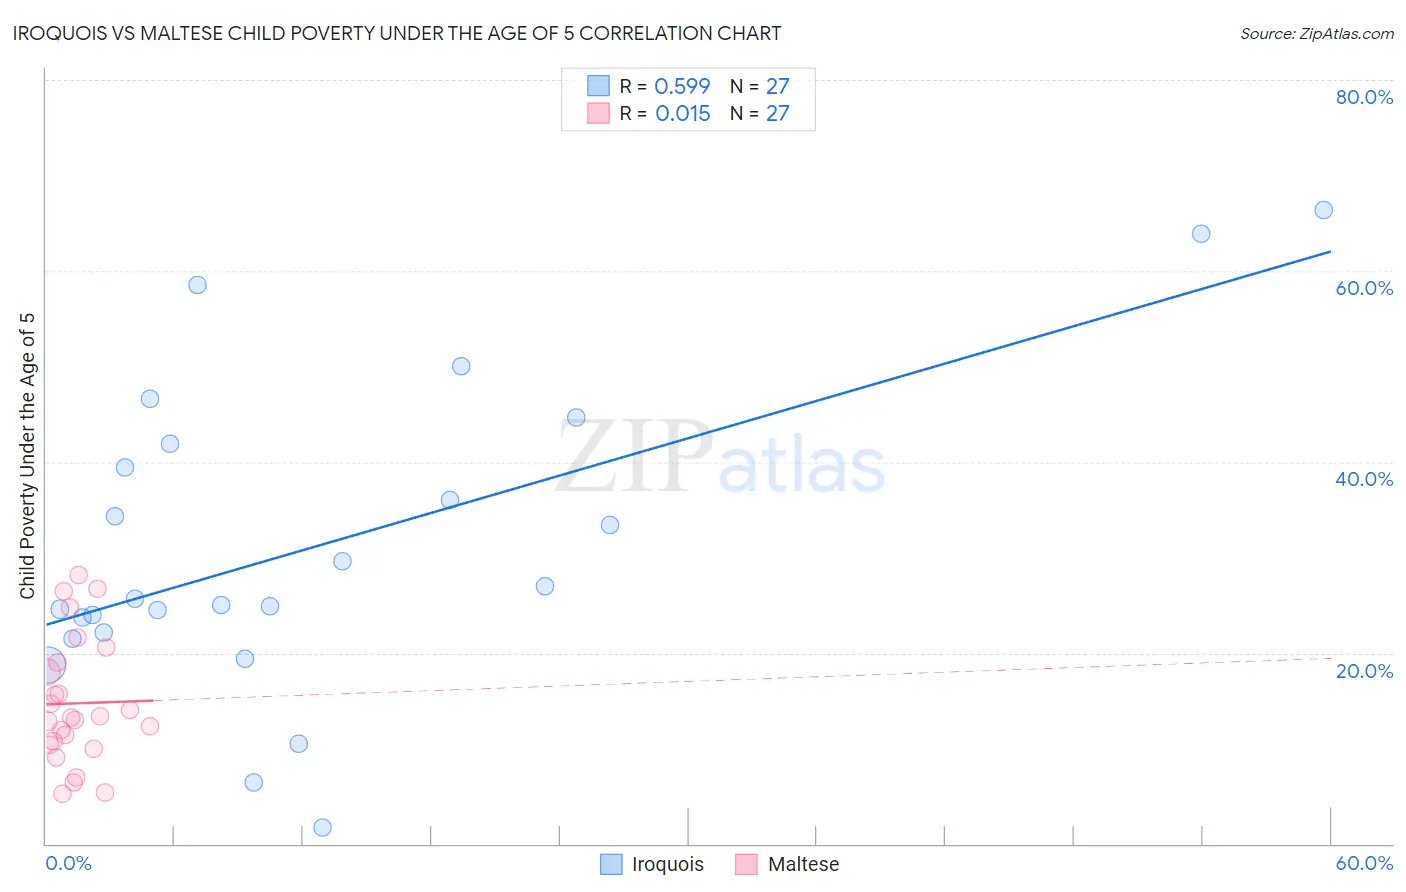 Iroquois vs Maltese Child Poverty Under the Age of 5